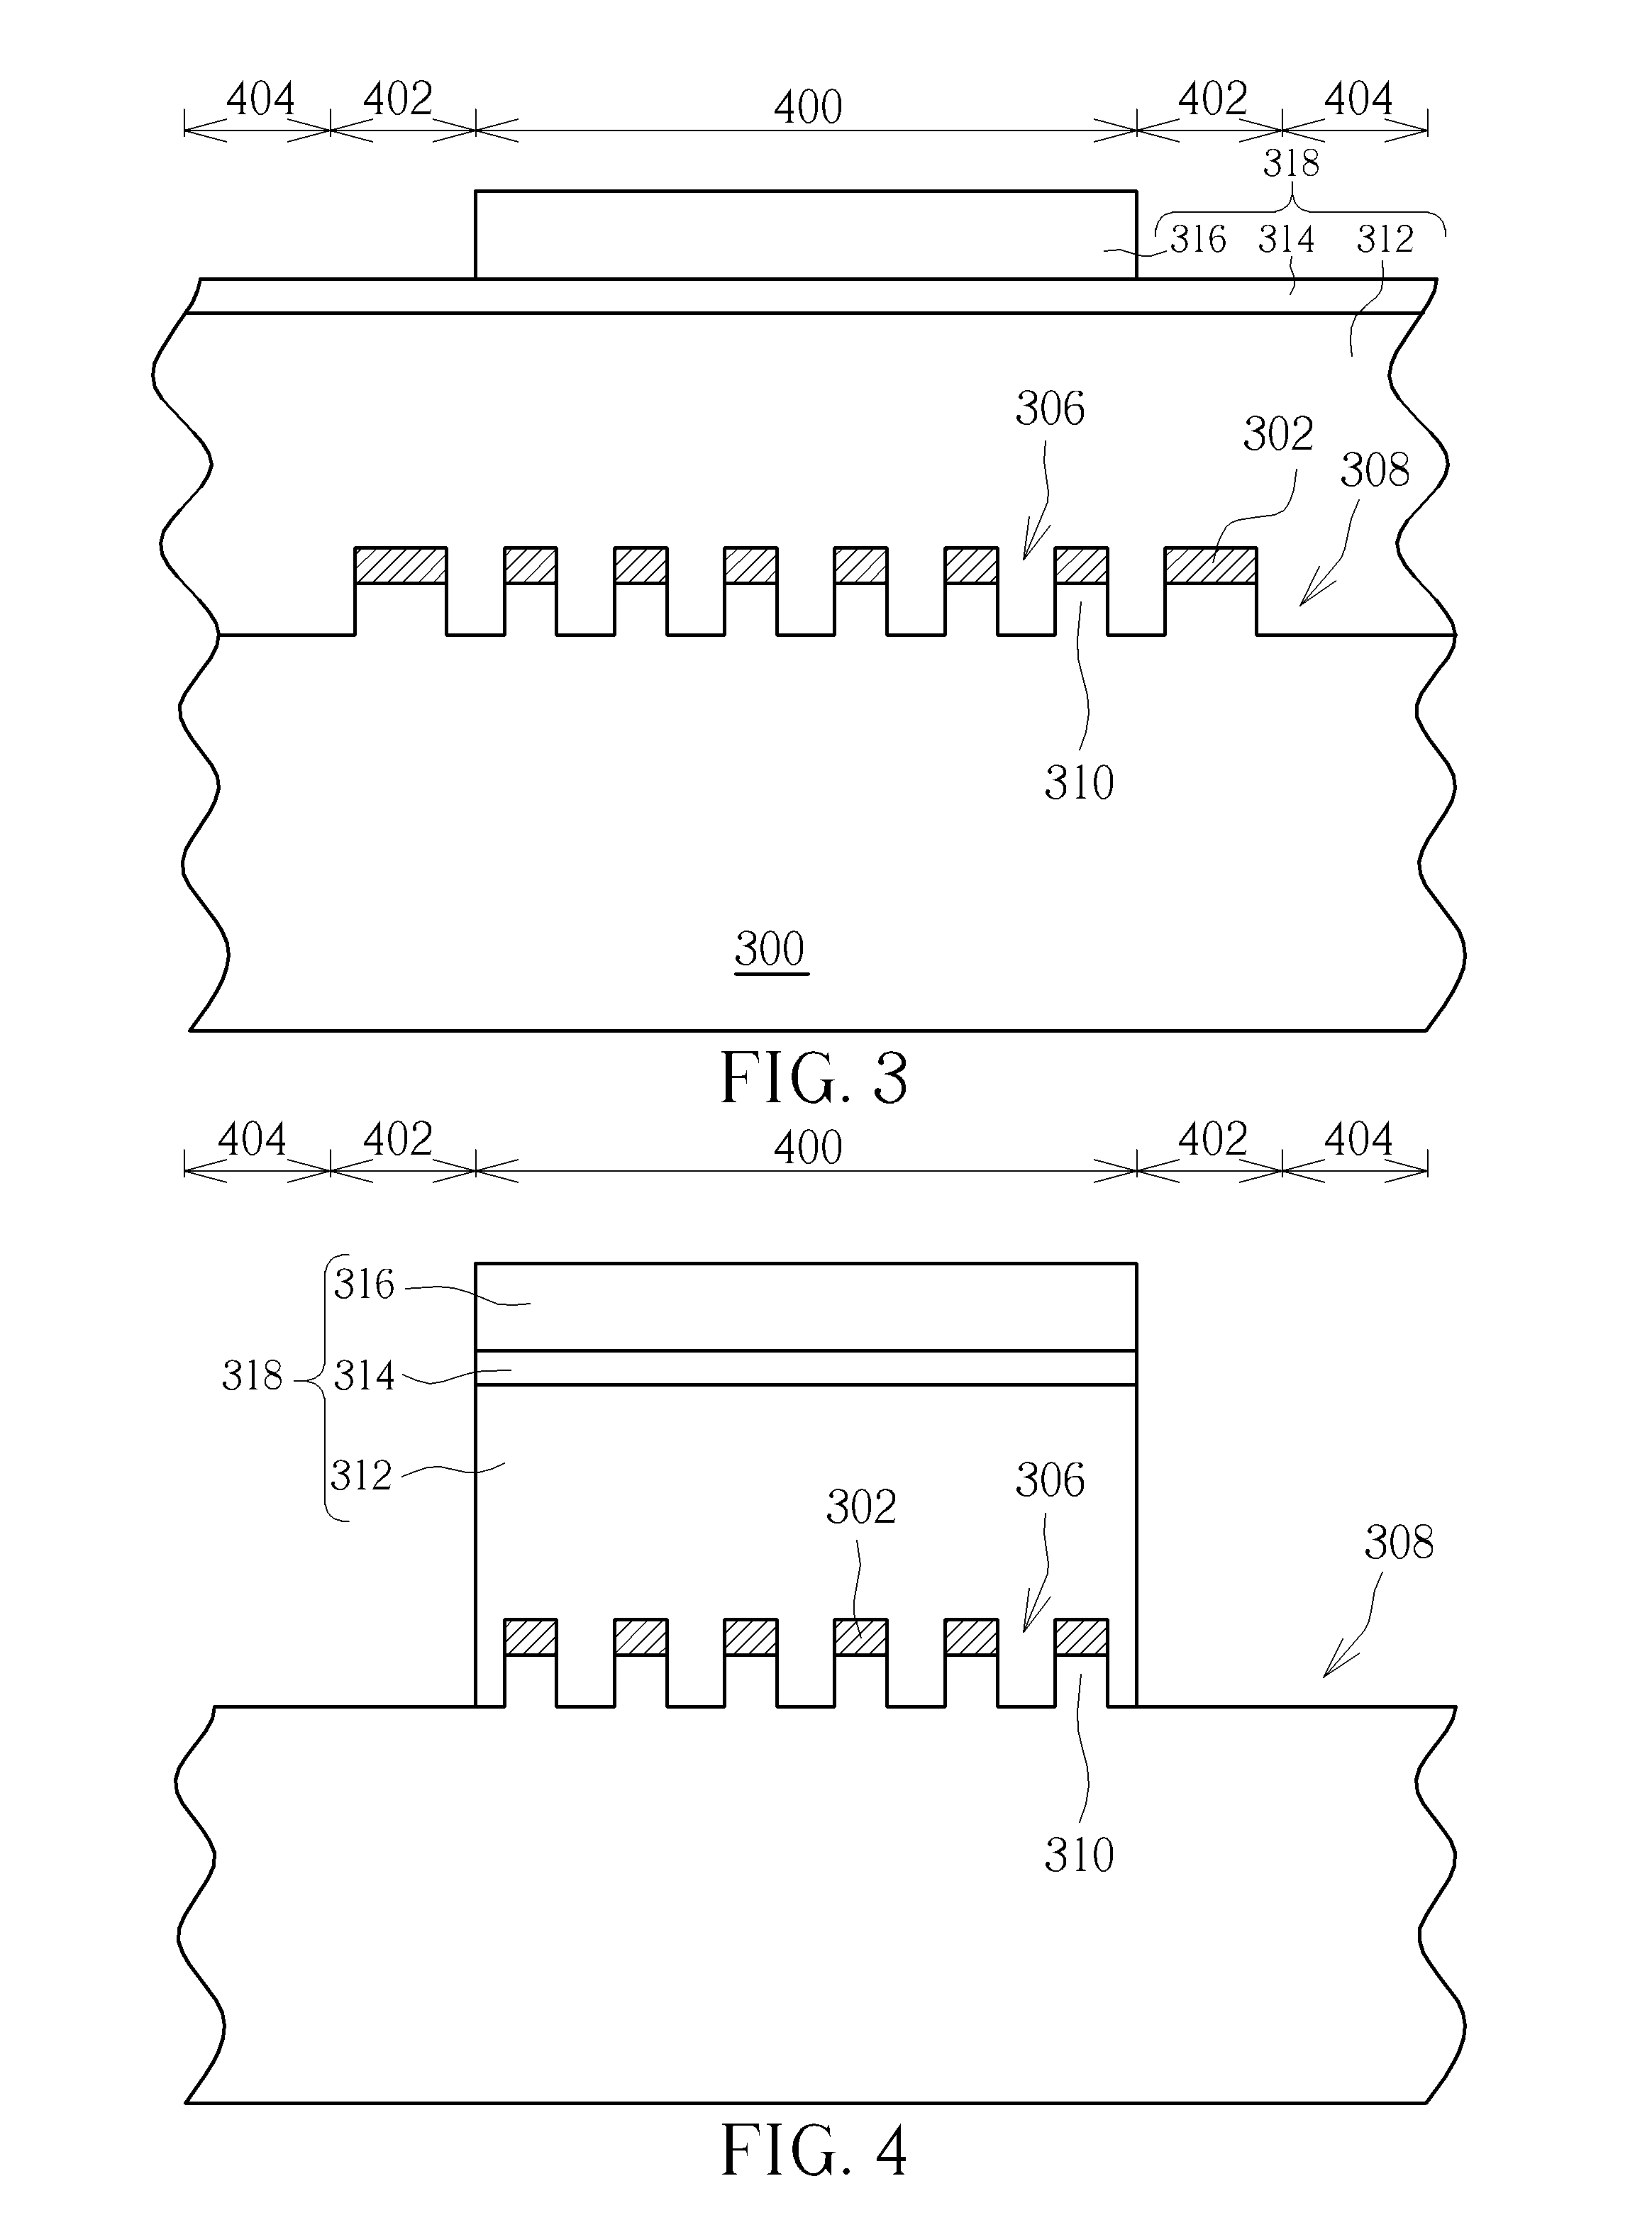 Method of forming a finfet  structure